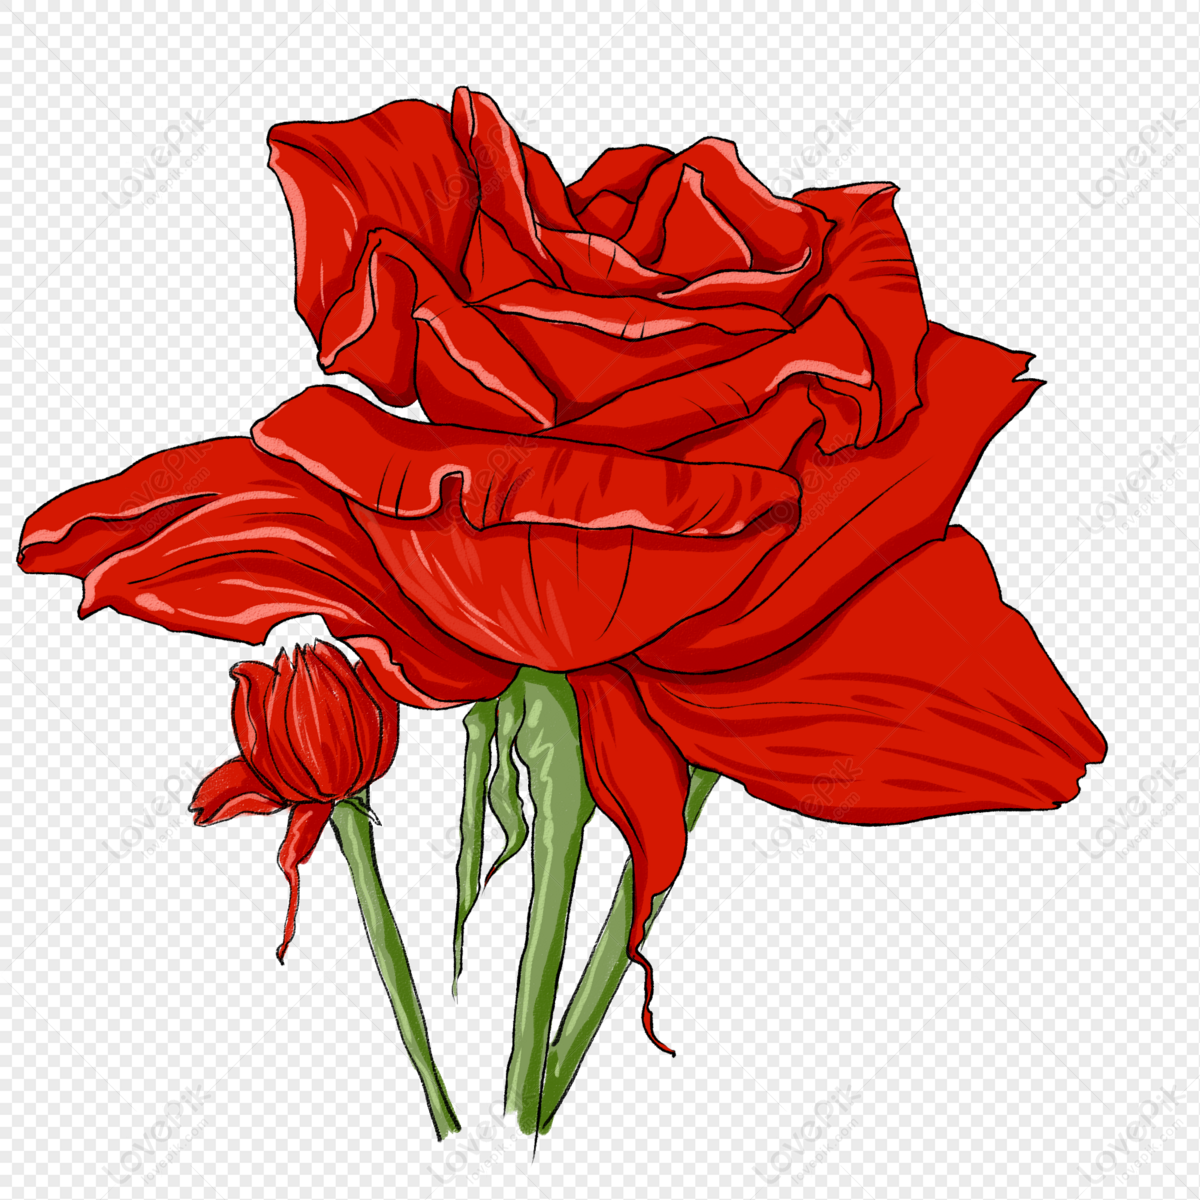 Red Rose PNG Image Free Download And Clipart Image For Free ...